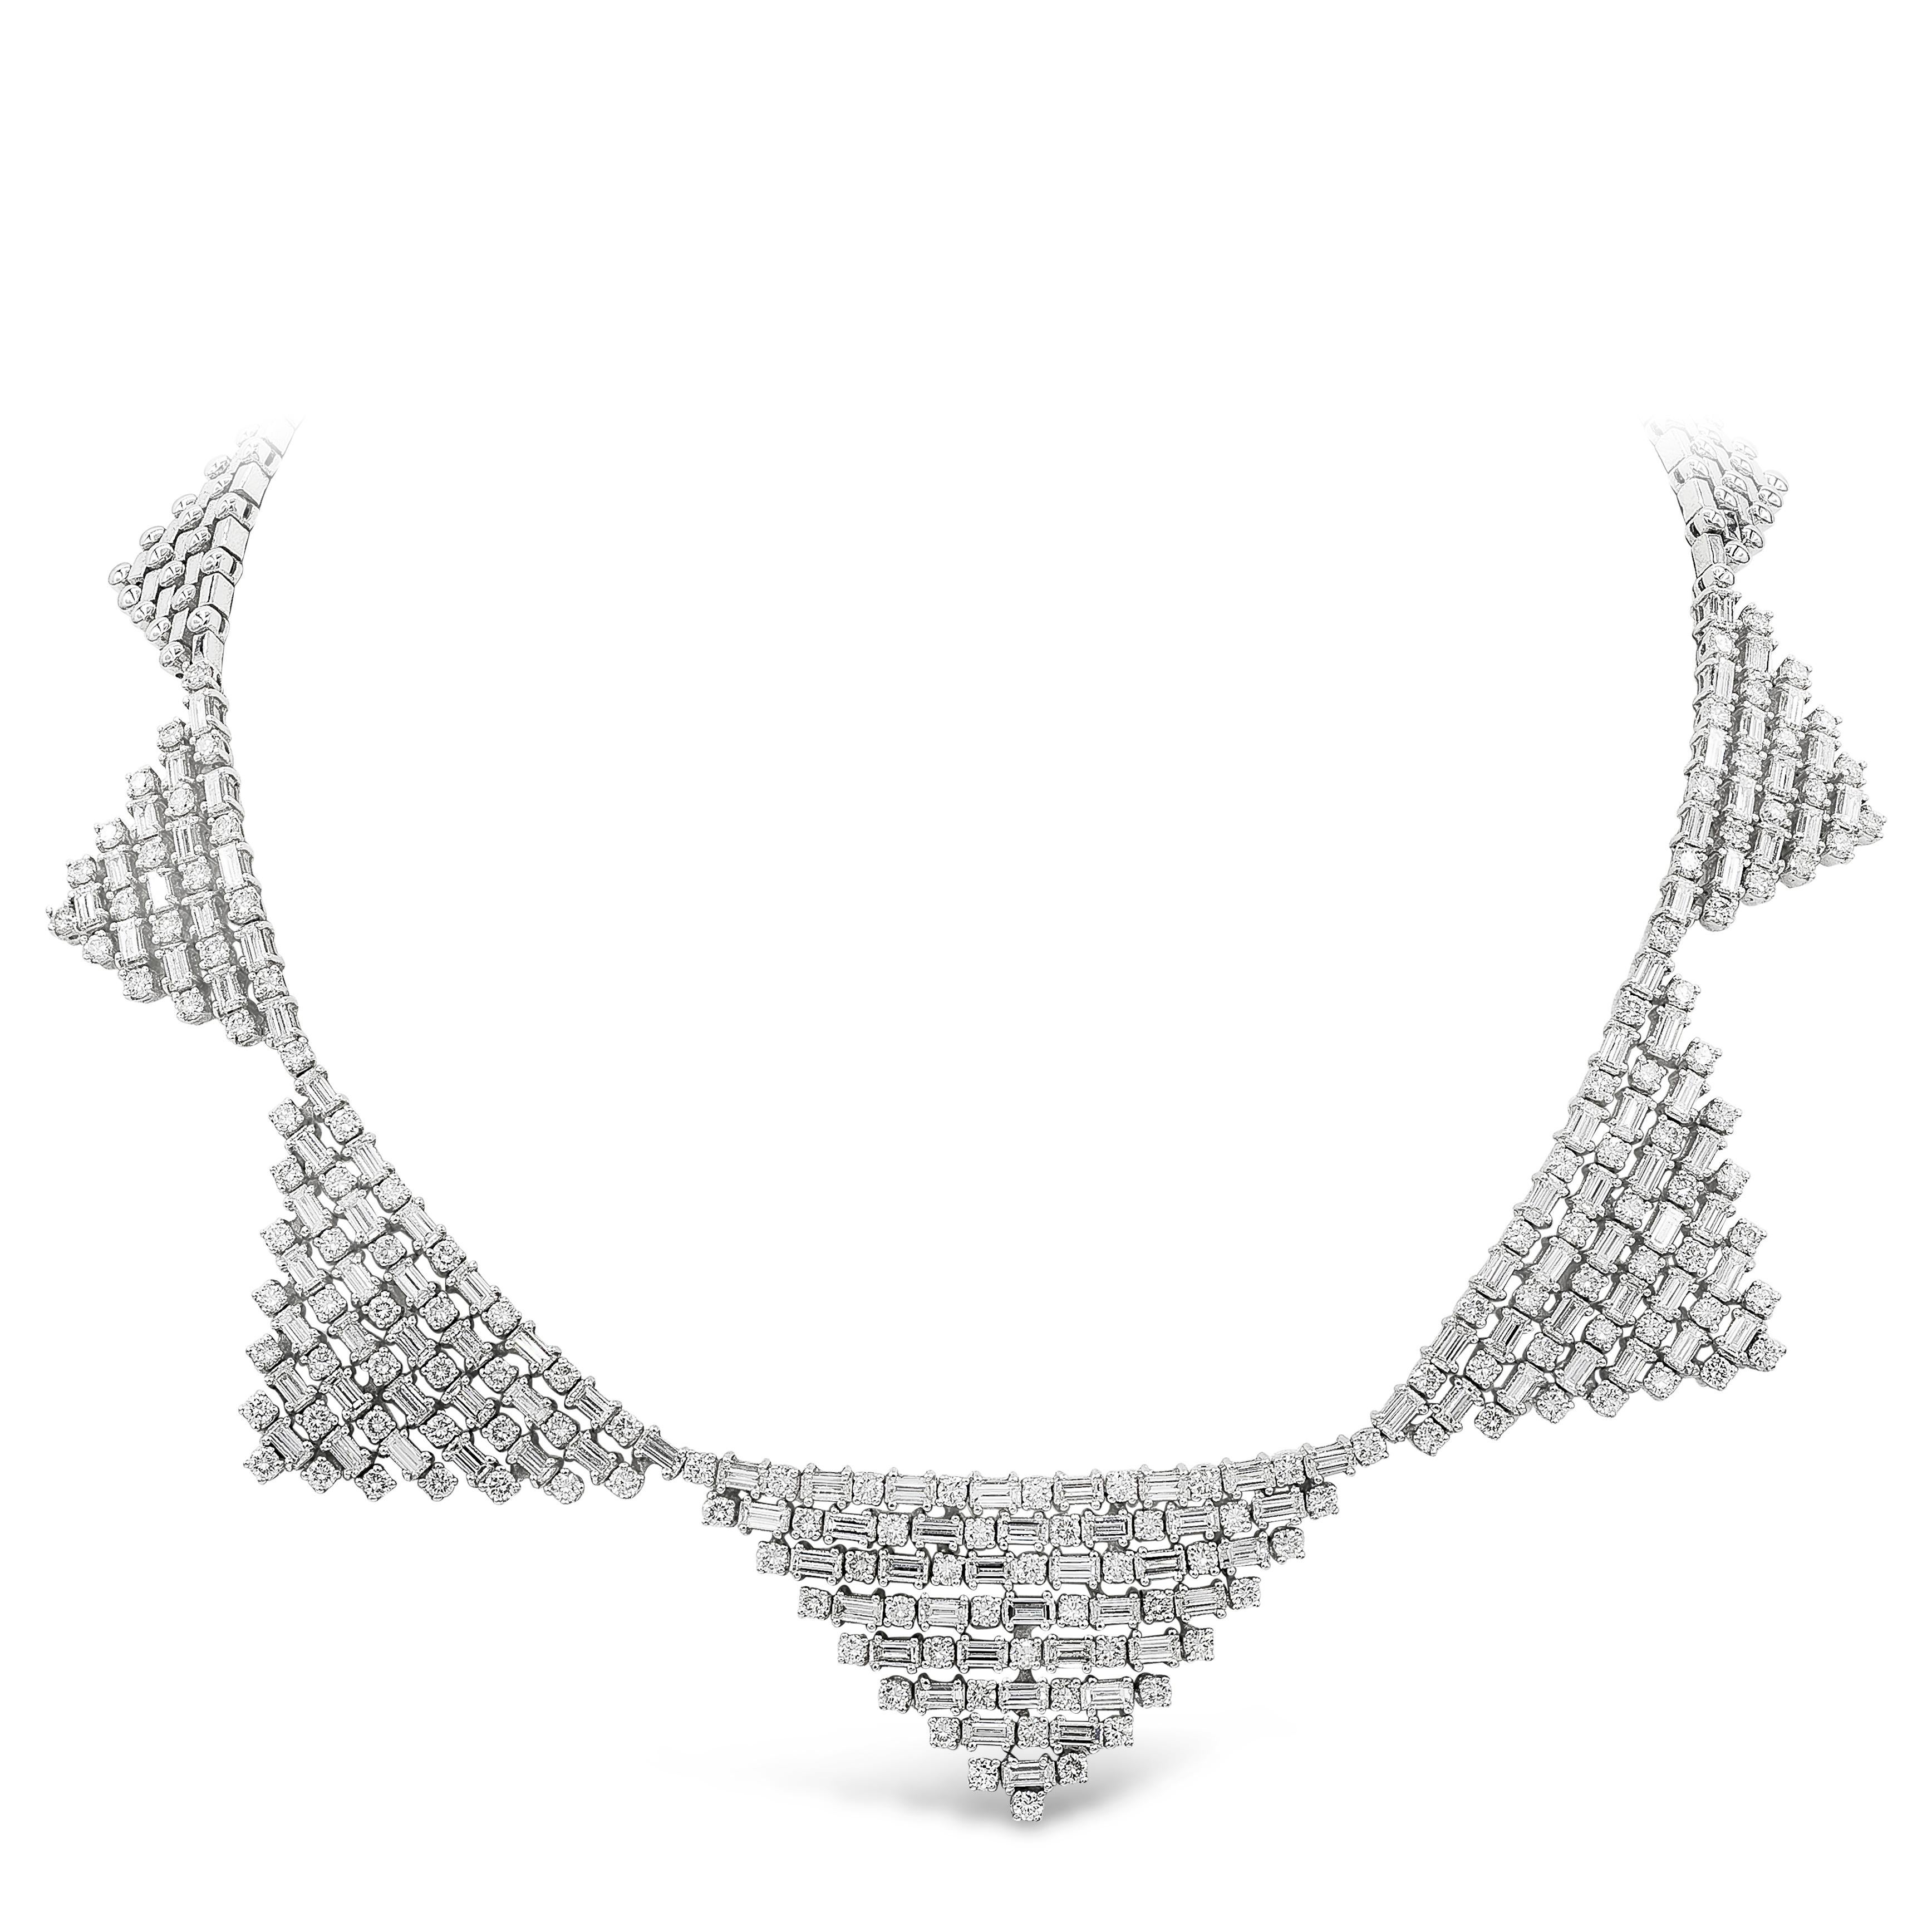 A fascinating and stylish necklace showcasing baguette and round cut diamonds set in a beautiful triangular design. Baguette diamonds weigh 15.60 carats total; round diamonds weigh 6.73 carats total. Finely made in 18K white gold.

Roman Malakov is